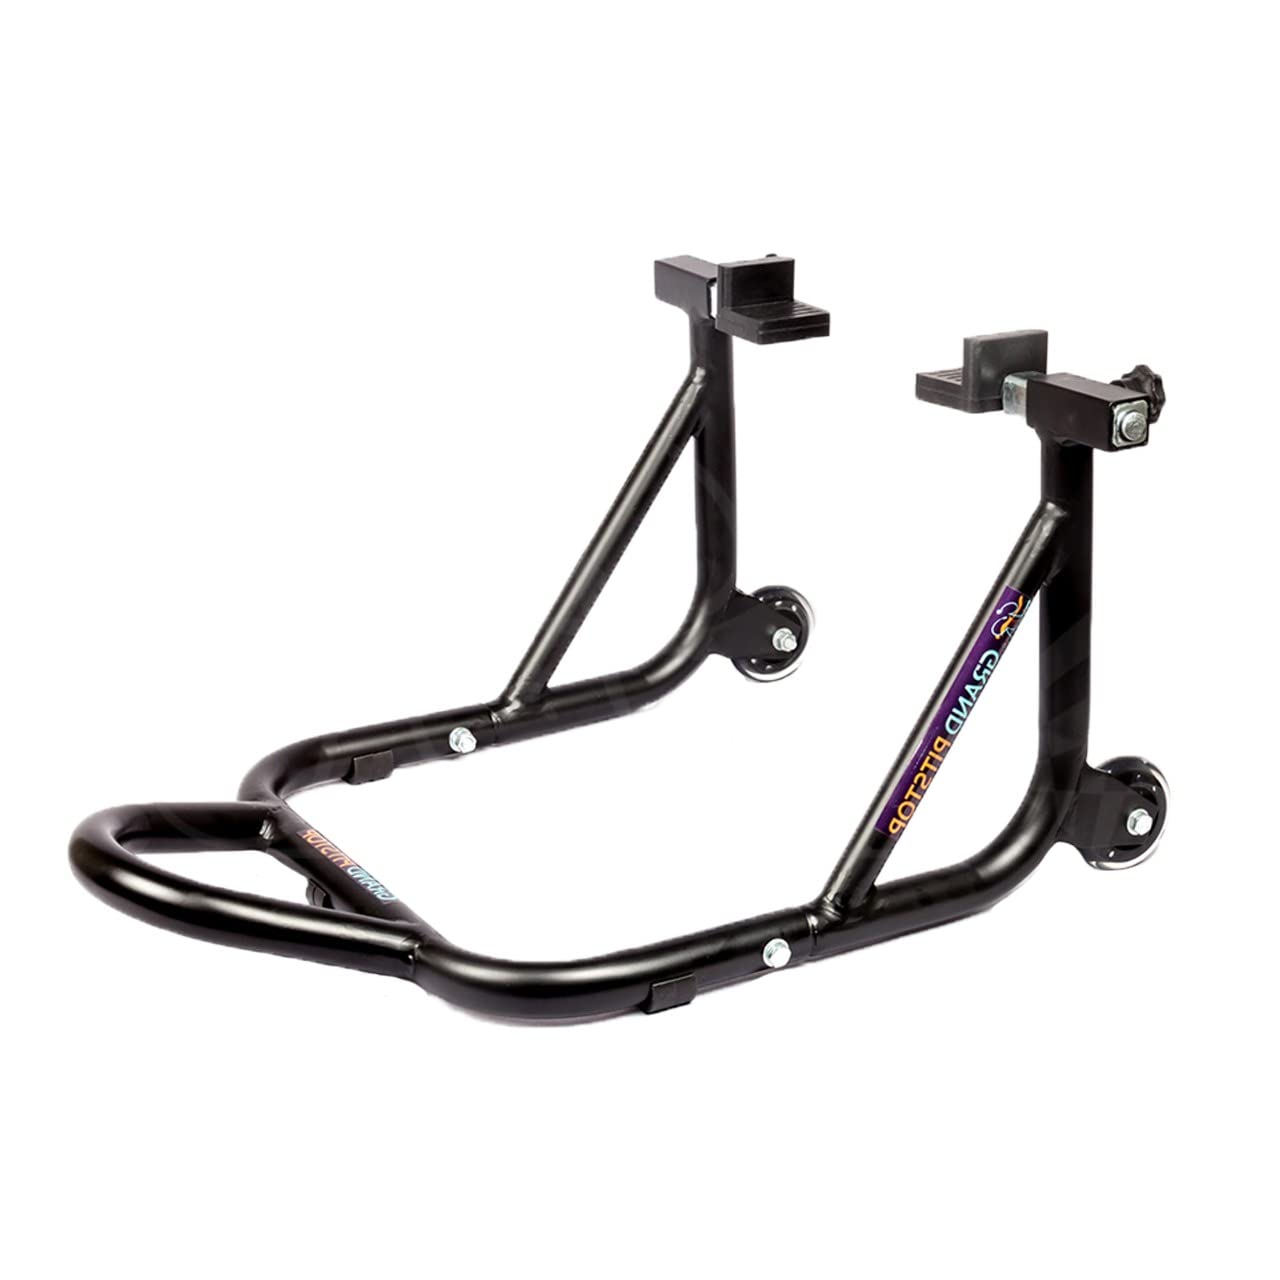 Grand Pitstop Universal Rear Paddock Stand for Bike Attached Skate Wheels with Swingarm Rest (Dismantable, Black) von GRAND PITSTOP